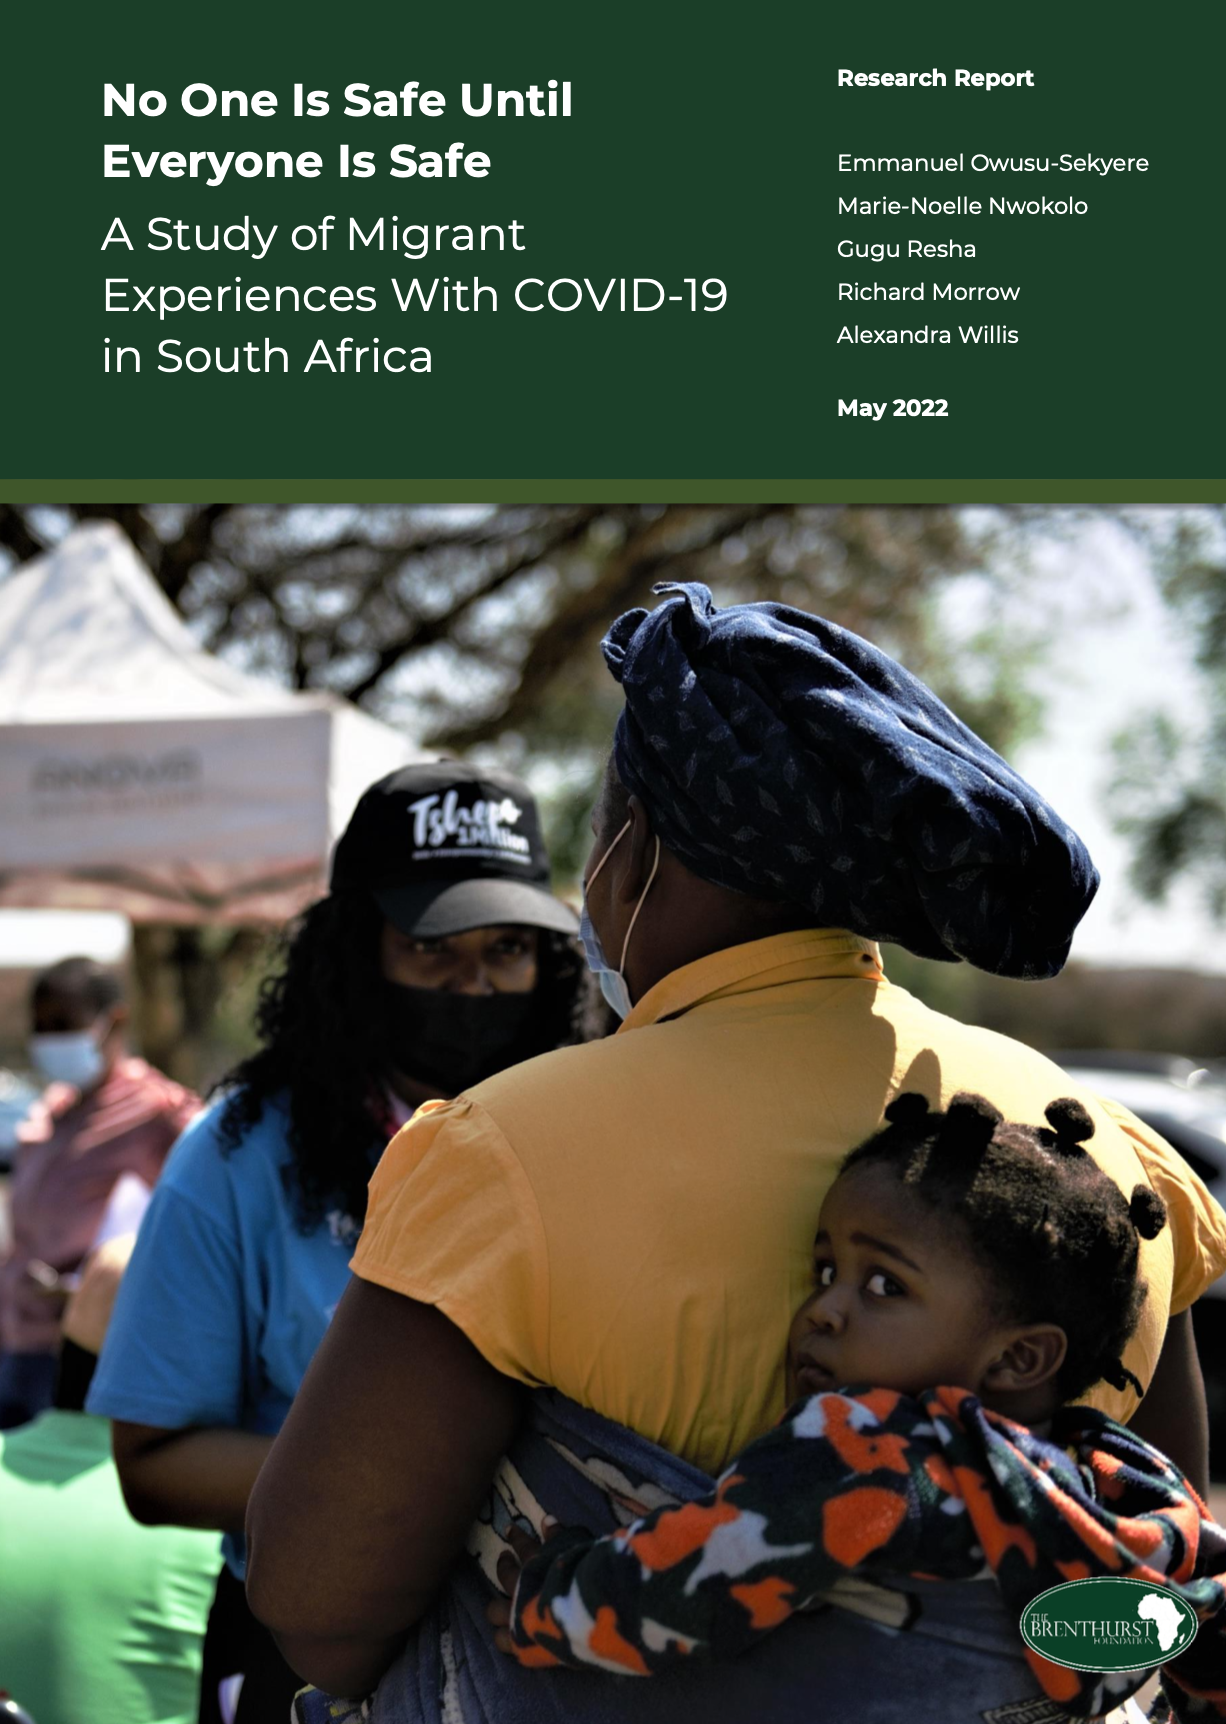 No One Is Safe Until Everyone Is Safe: A Study of Migrant Experiences With COVID-19 in South Africa